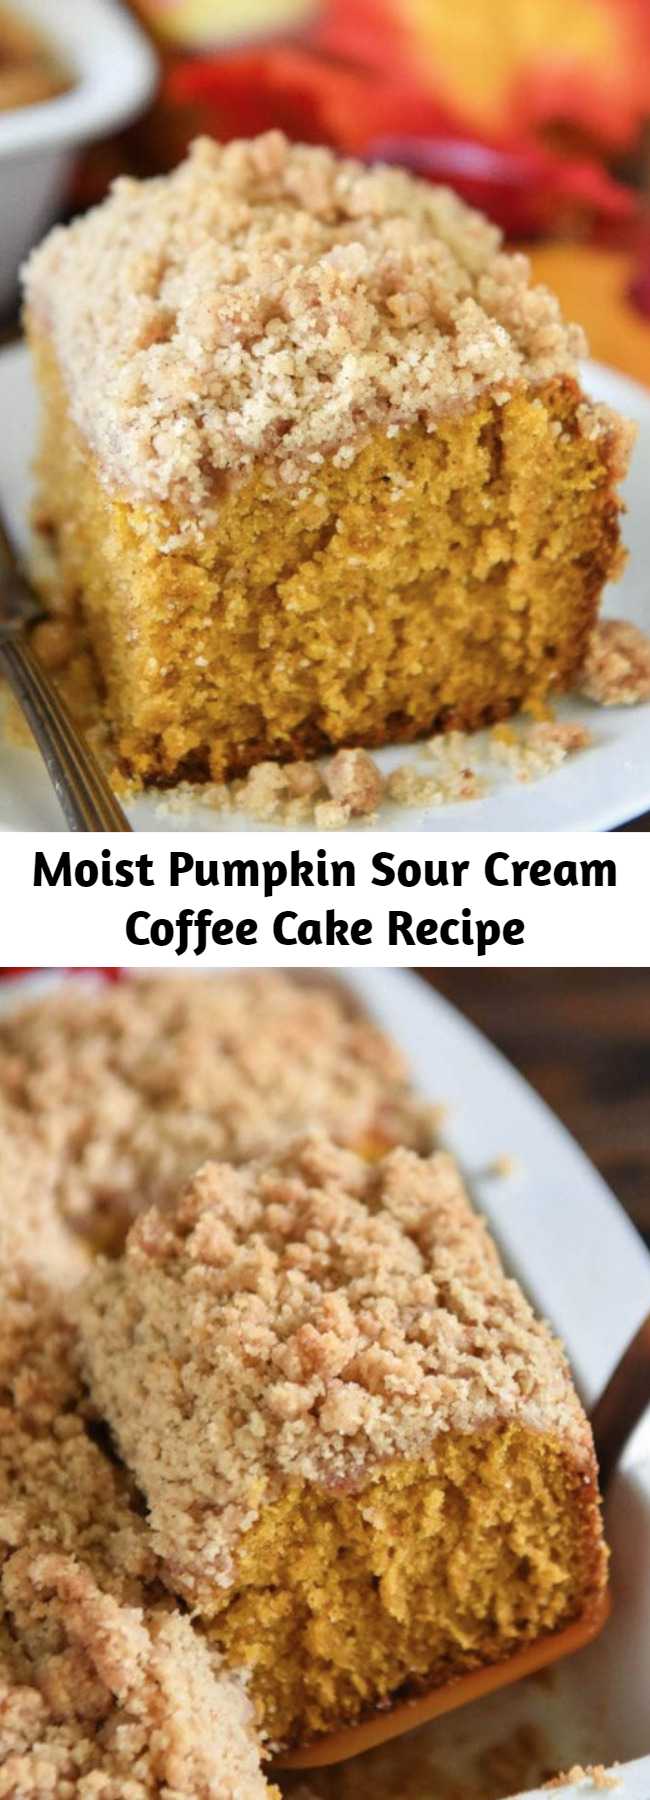 Moist Pumpkin Sour Cream Coffee Cake Recipe - Pumpkin Sour Cream Coffee Cake. An Extra Moist Pumpkin Spice Cake, Topped With a Cinnamon Crumb Topping, Makes a Perfect Fall Breakfast Coffee Cake or Dessert. #Pumpkin #CoffeeCake #Dessert #Cake